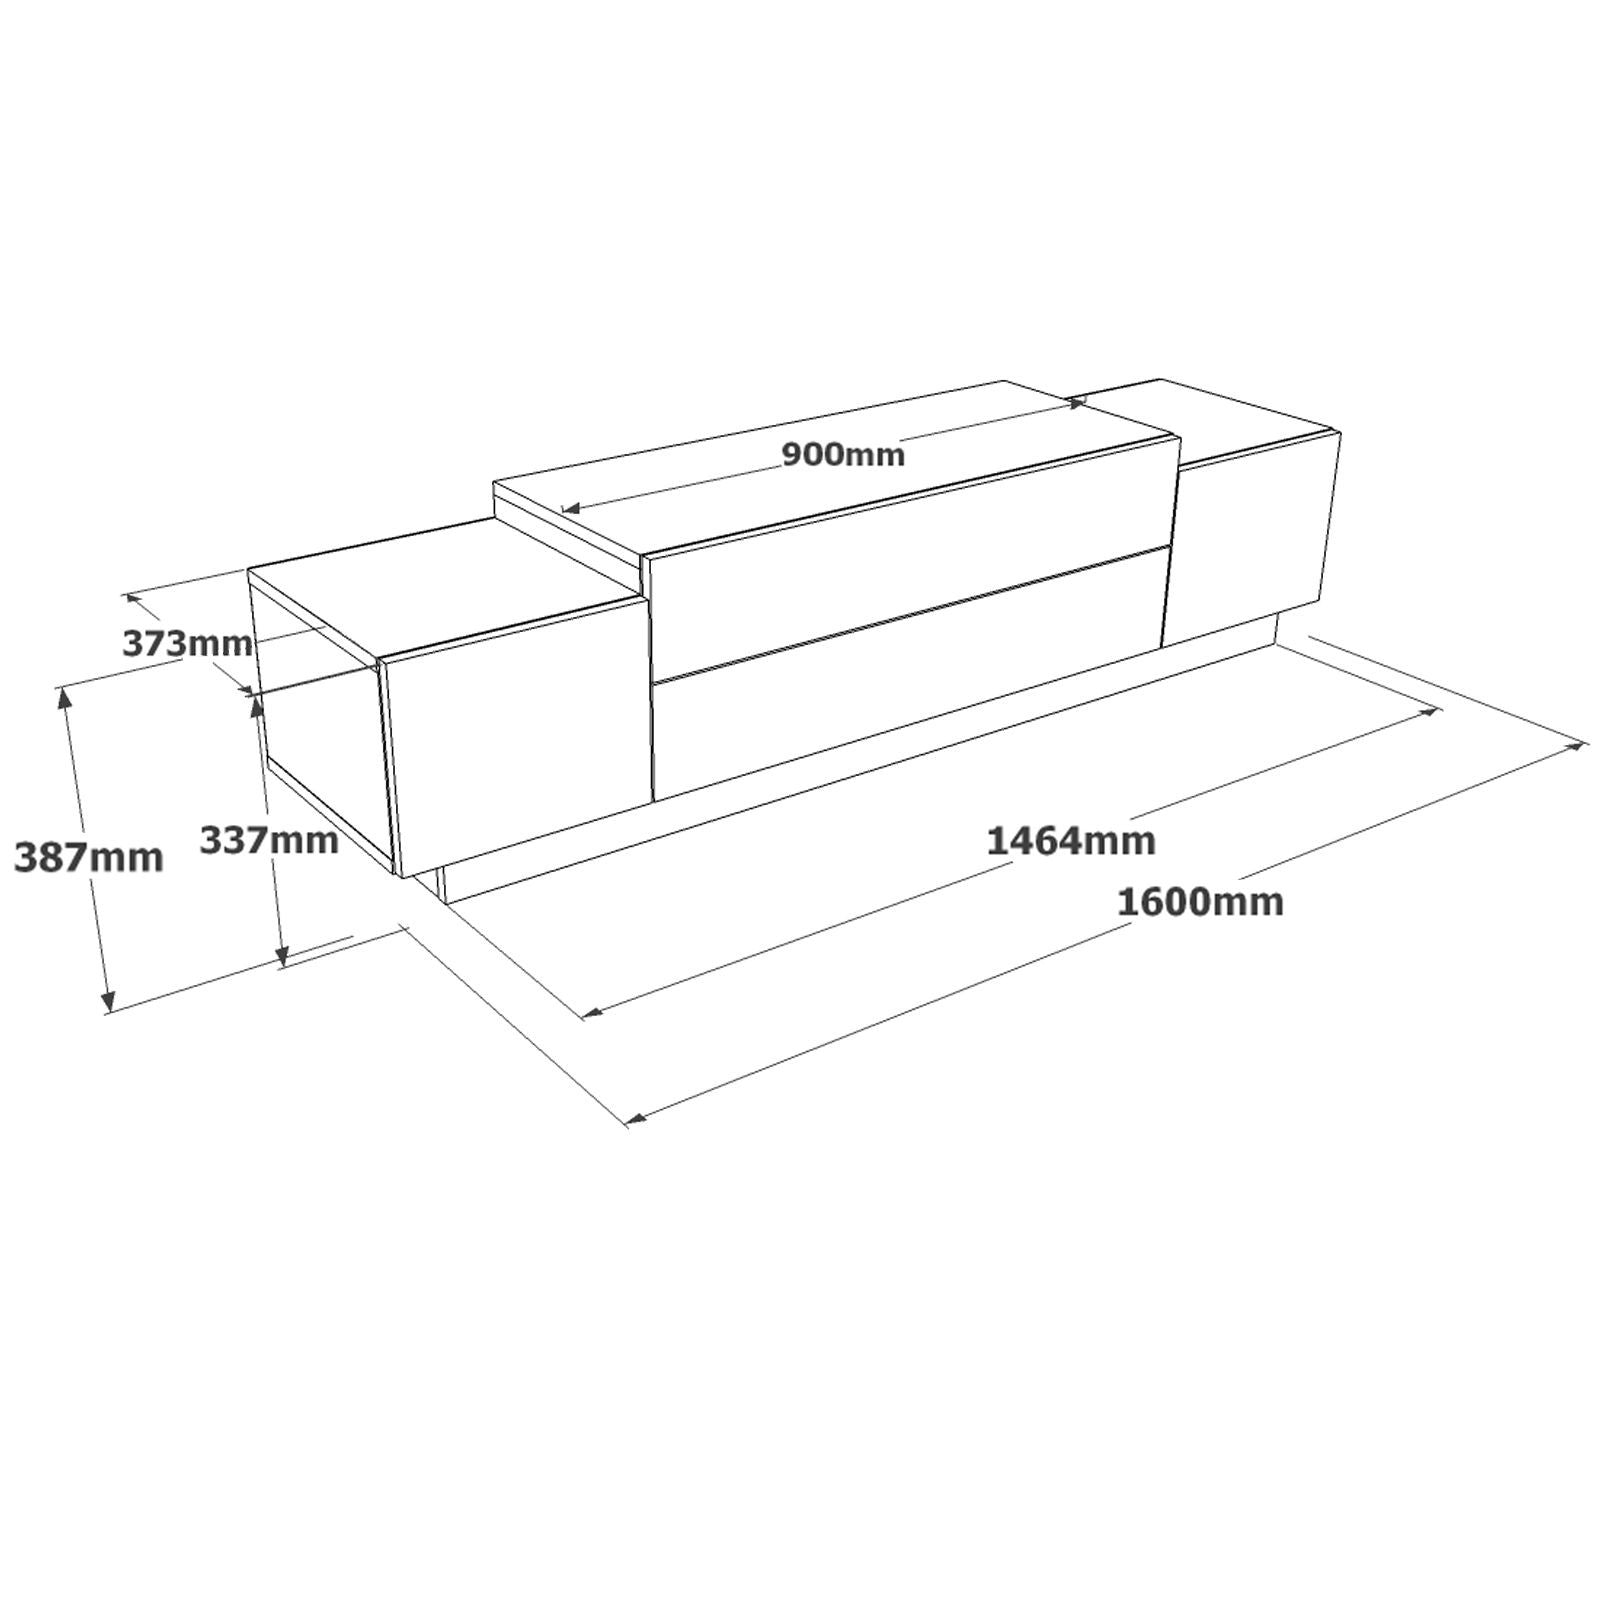 TV Stand FD1 - WK